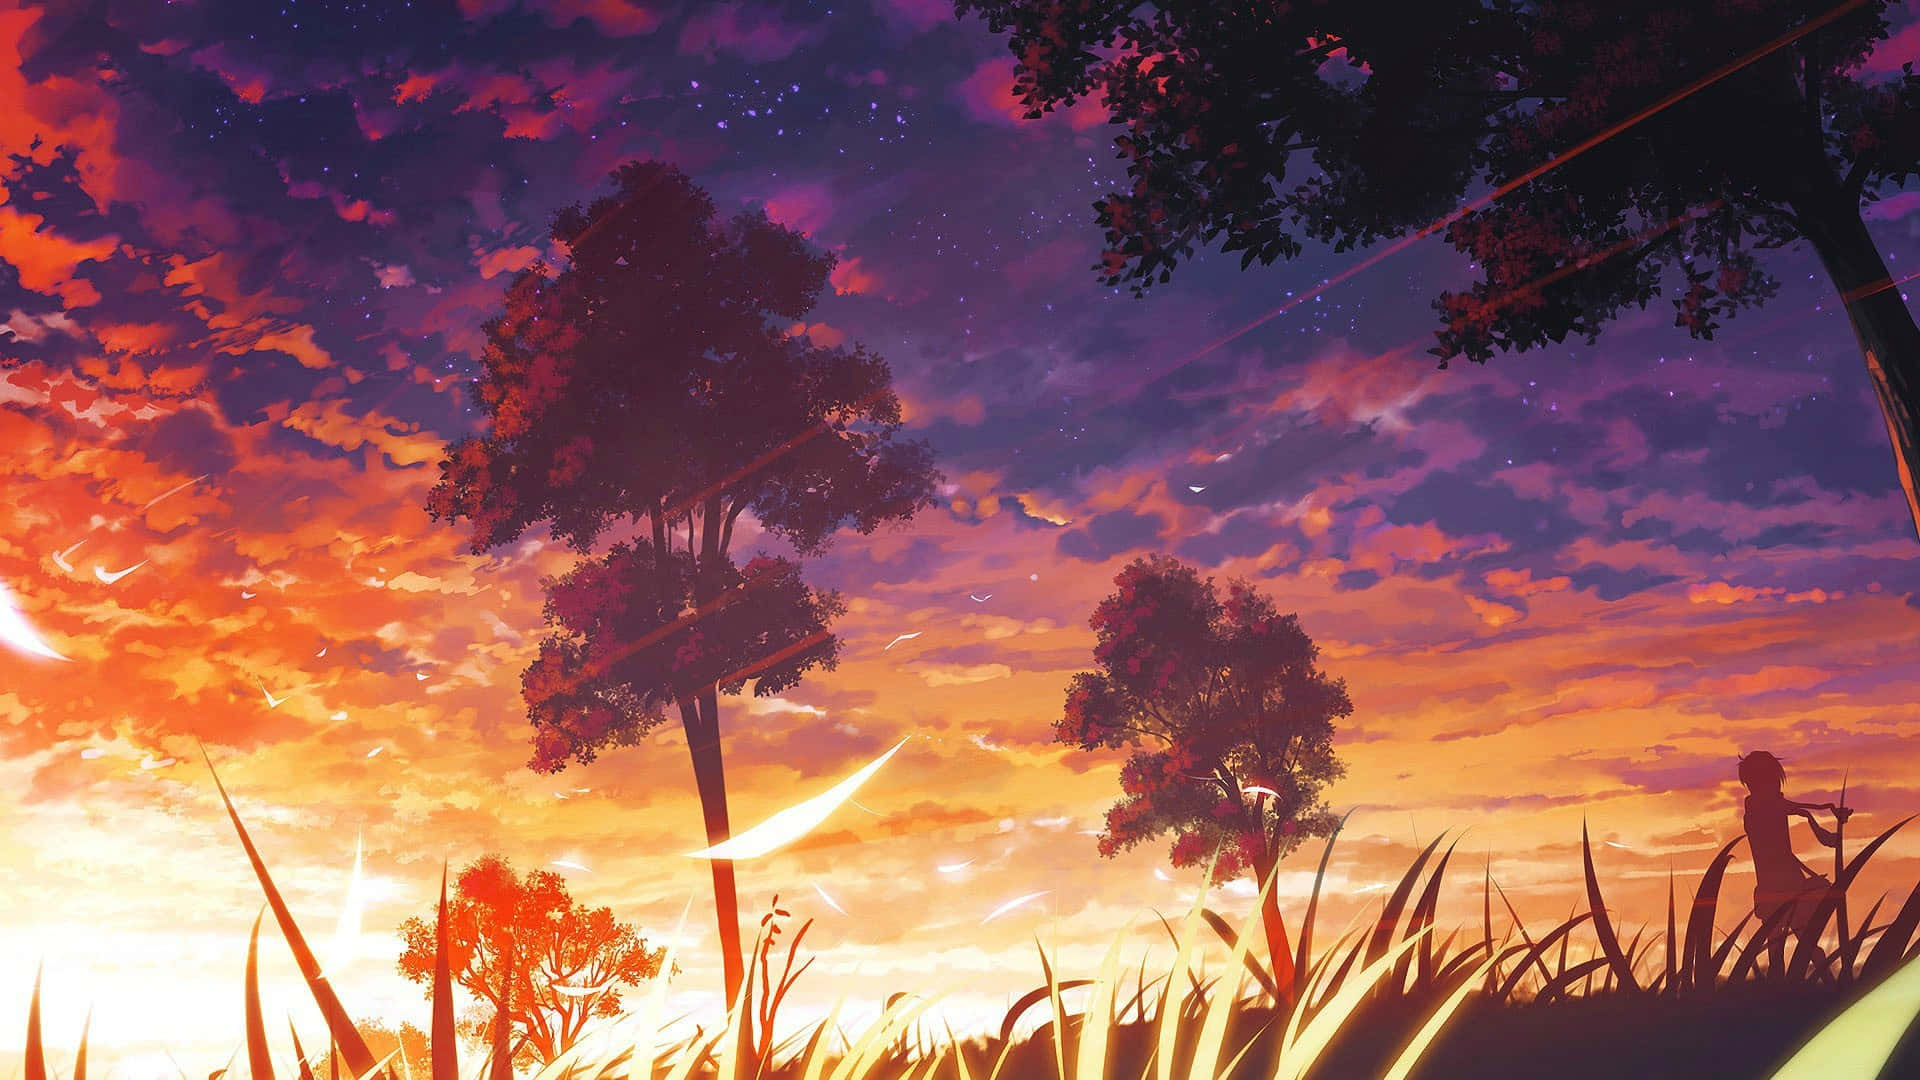 Witness a stunning sky with Anime characters in the back!